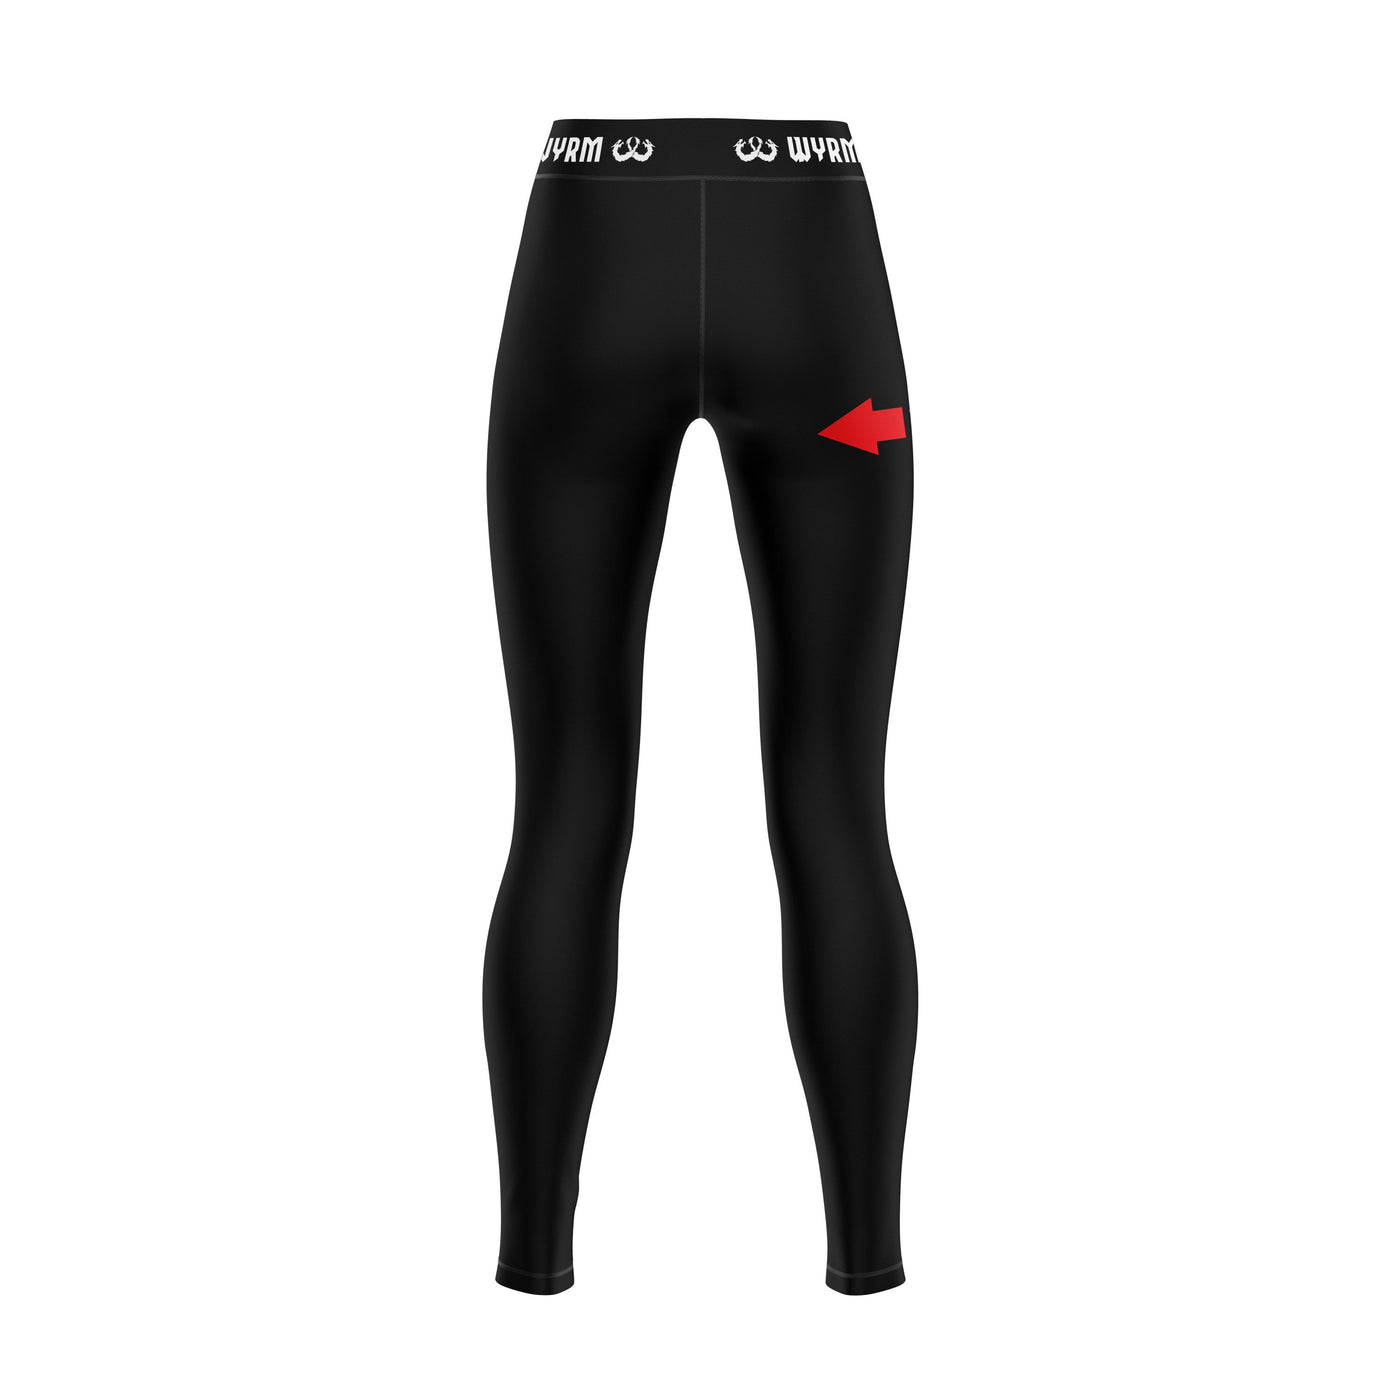 Customized Black Compression Spats